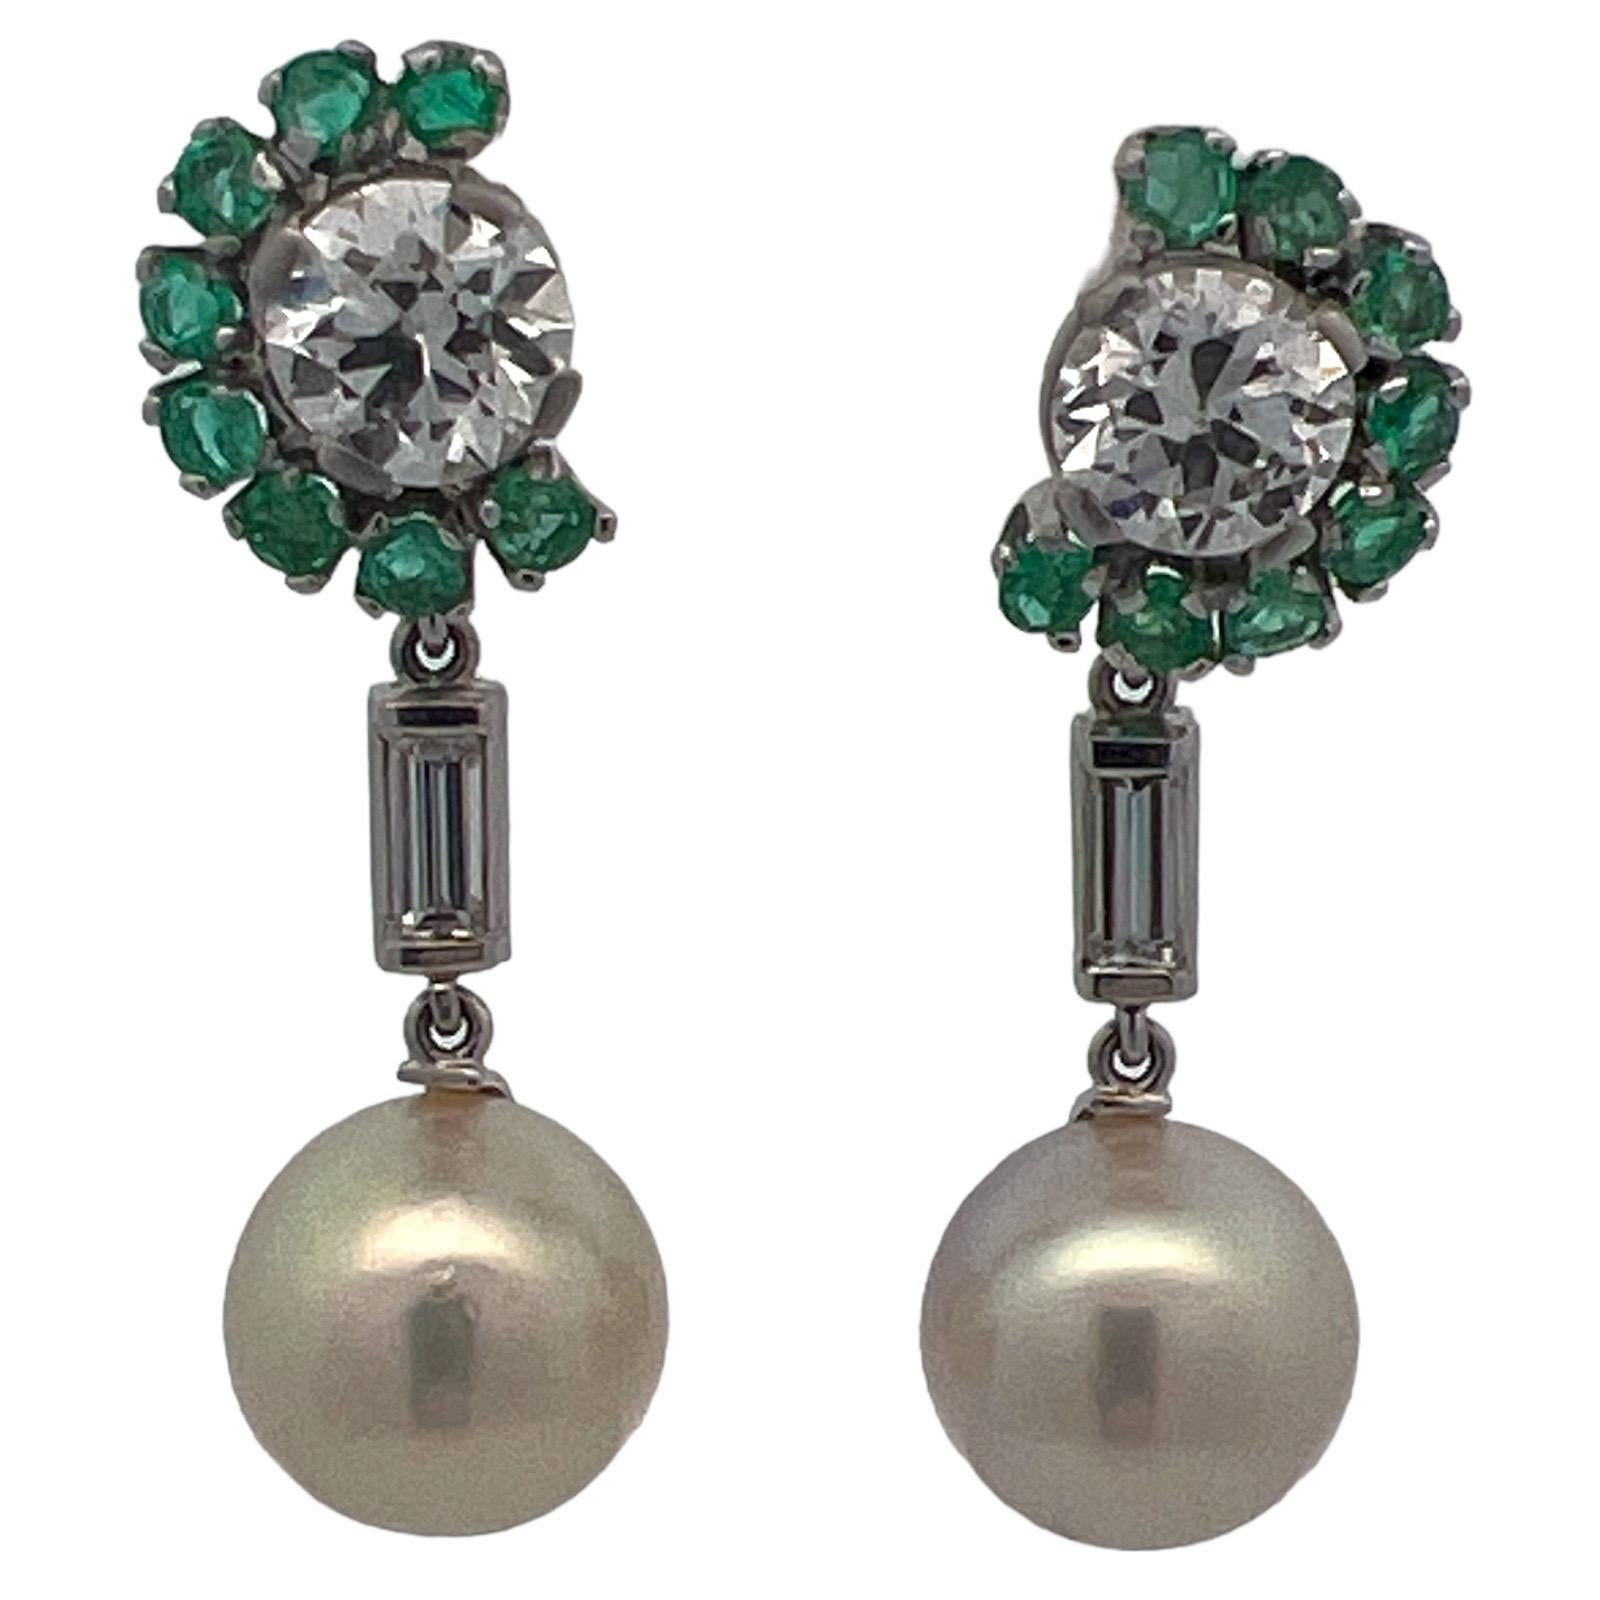 Gorgeous diamond and South Sea Pearl drop earrings fashioned in platinum. The earrings features 2 Old European cut diamonds weighing 2.09 CTW. The diamonds are GIA certified E and G color and SI1/SI2 clarity. The diamonds are surrounded by emerald